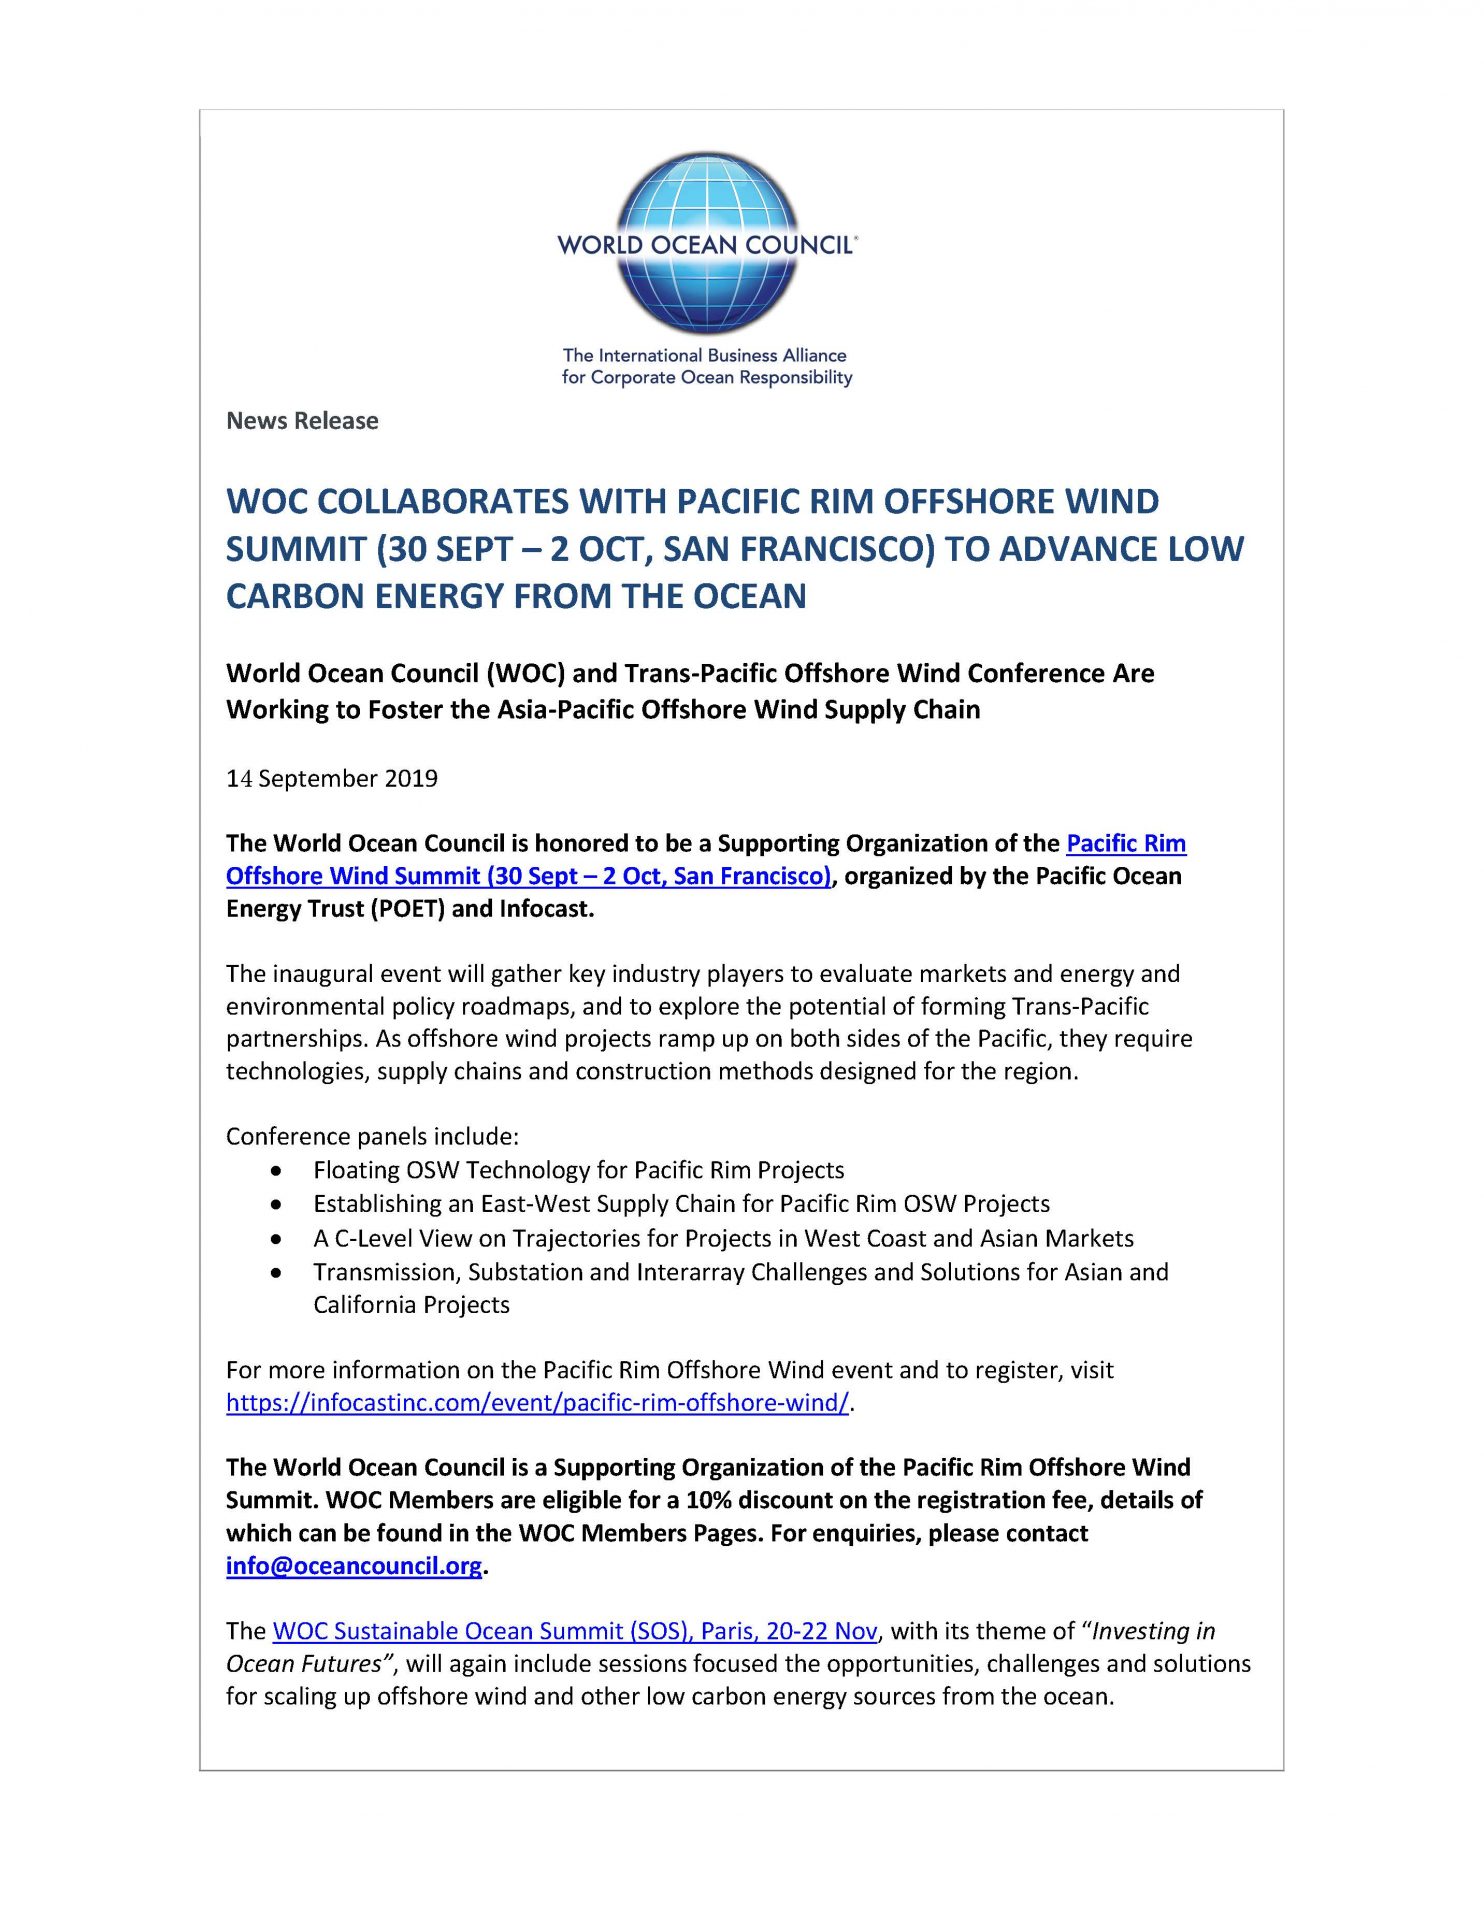 WOC Collaborates with Pacific Rim Offshore Wind Summit (30 Sept – 2 Oct, San Francisco) to Advance Low Carbon Energy from the Ocean - 14 September 2019